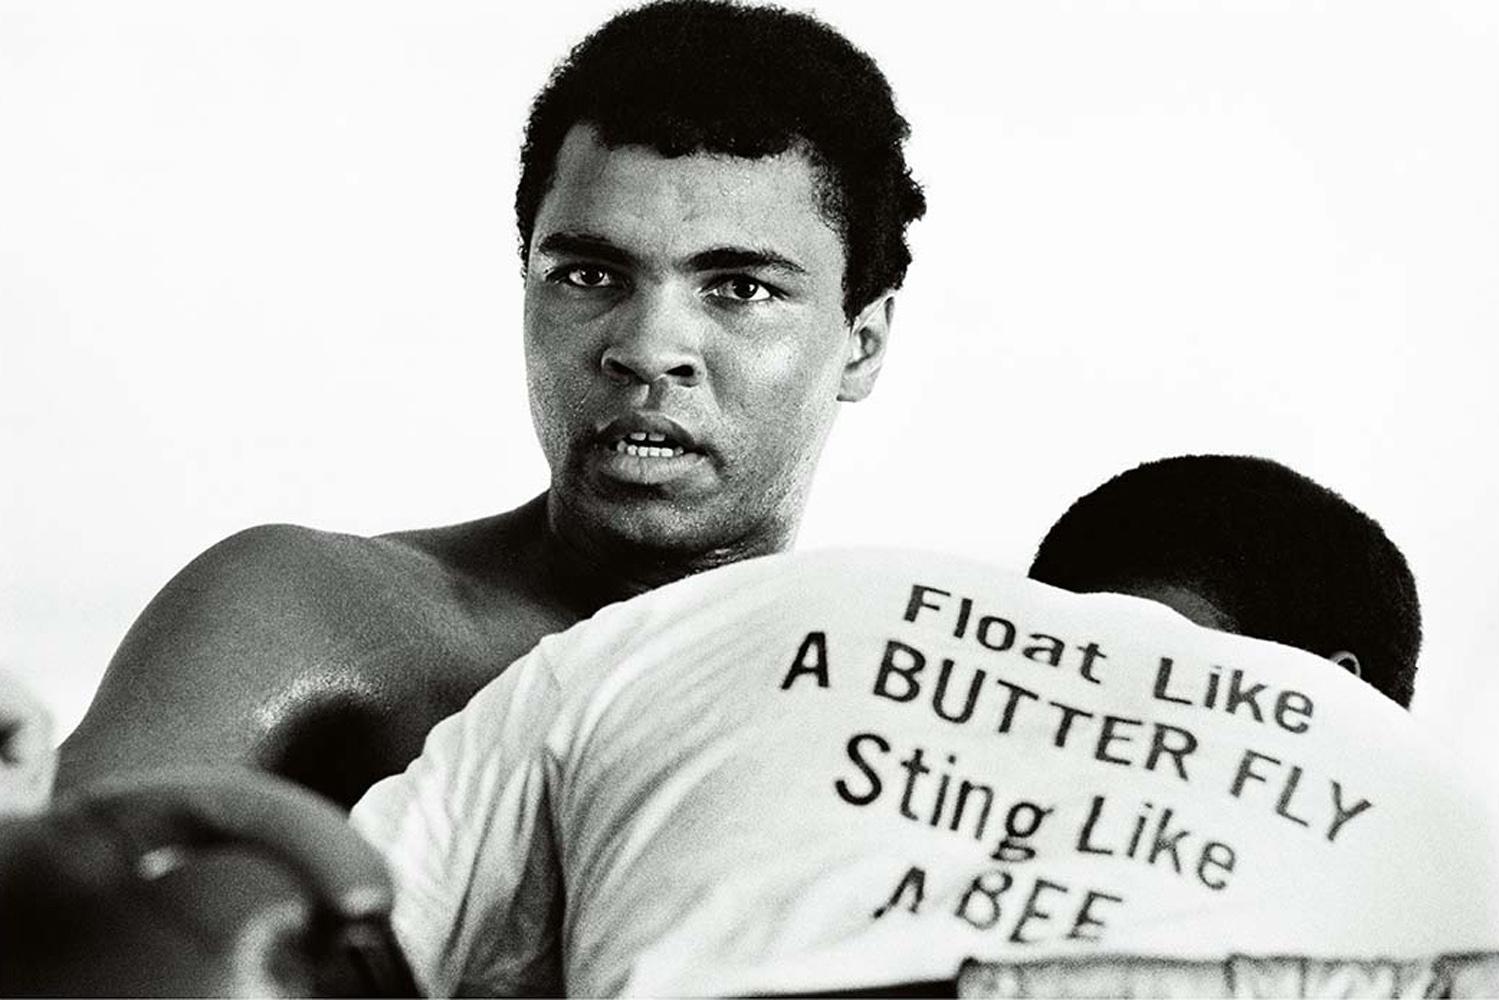 Float Like a Butterfly, Sting Like a Bee - Chris Smith, Muhammad Ali, 46x66 in